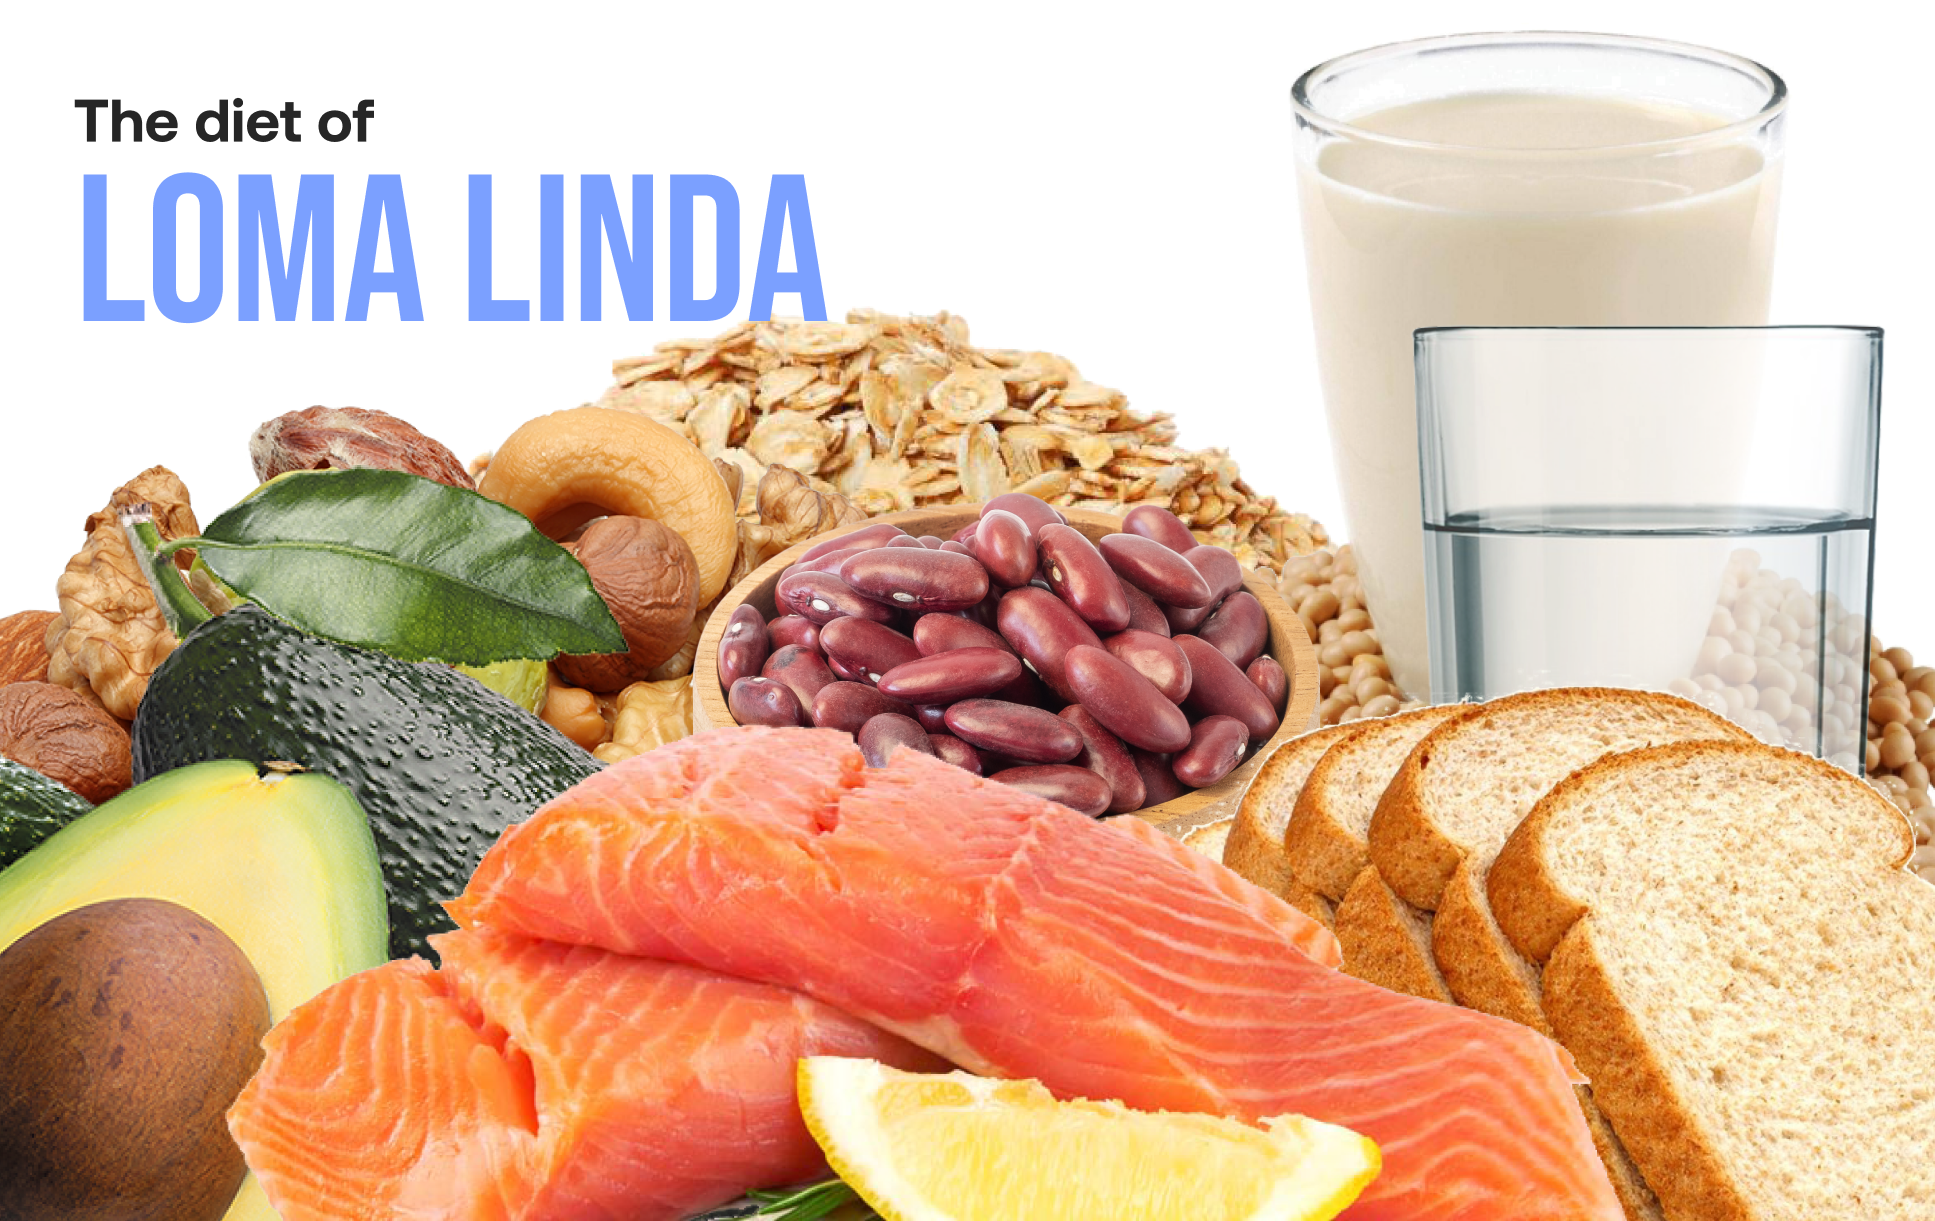 The diet of Loma Linda